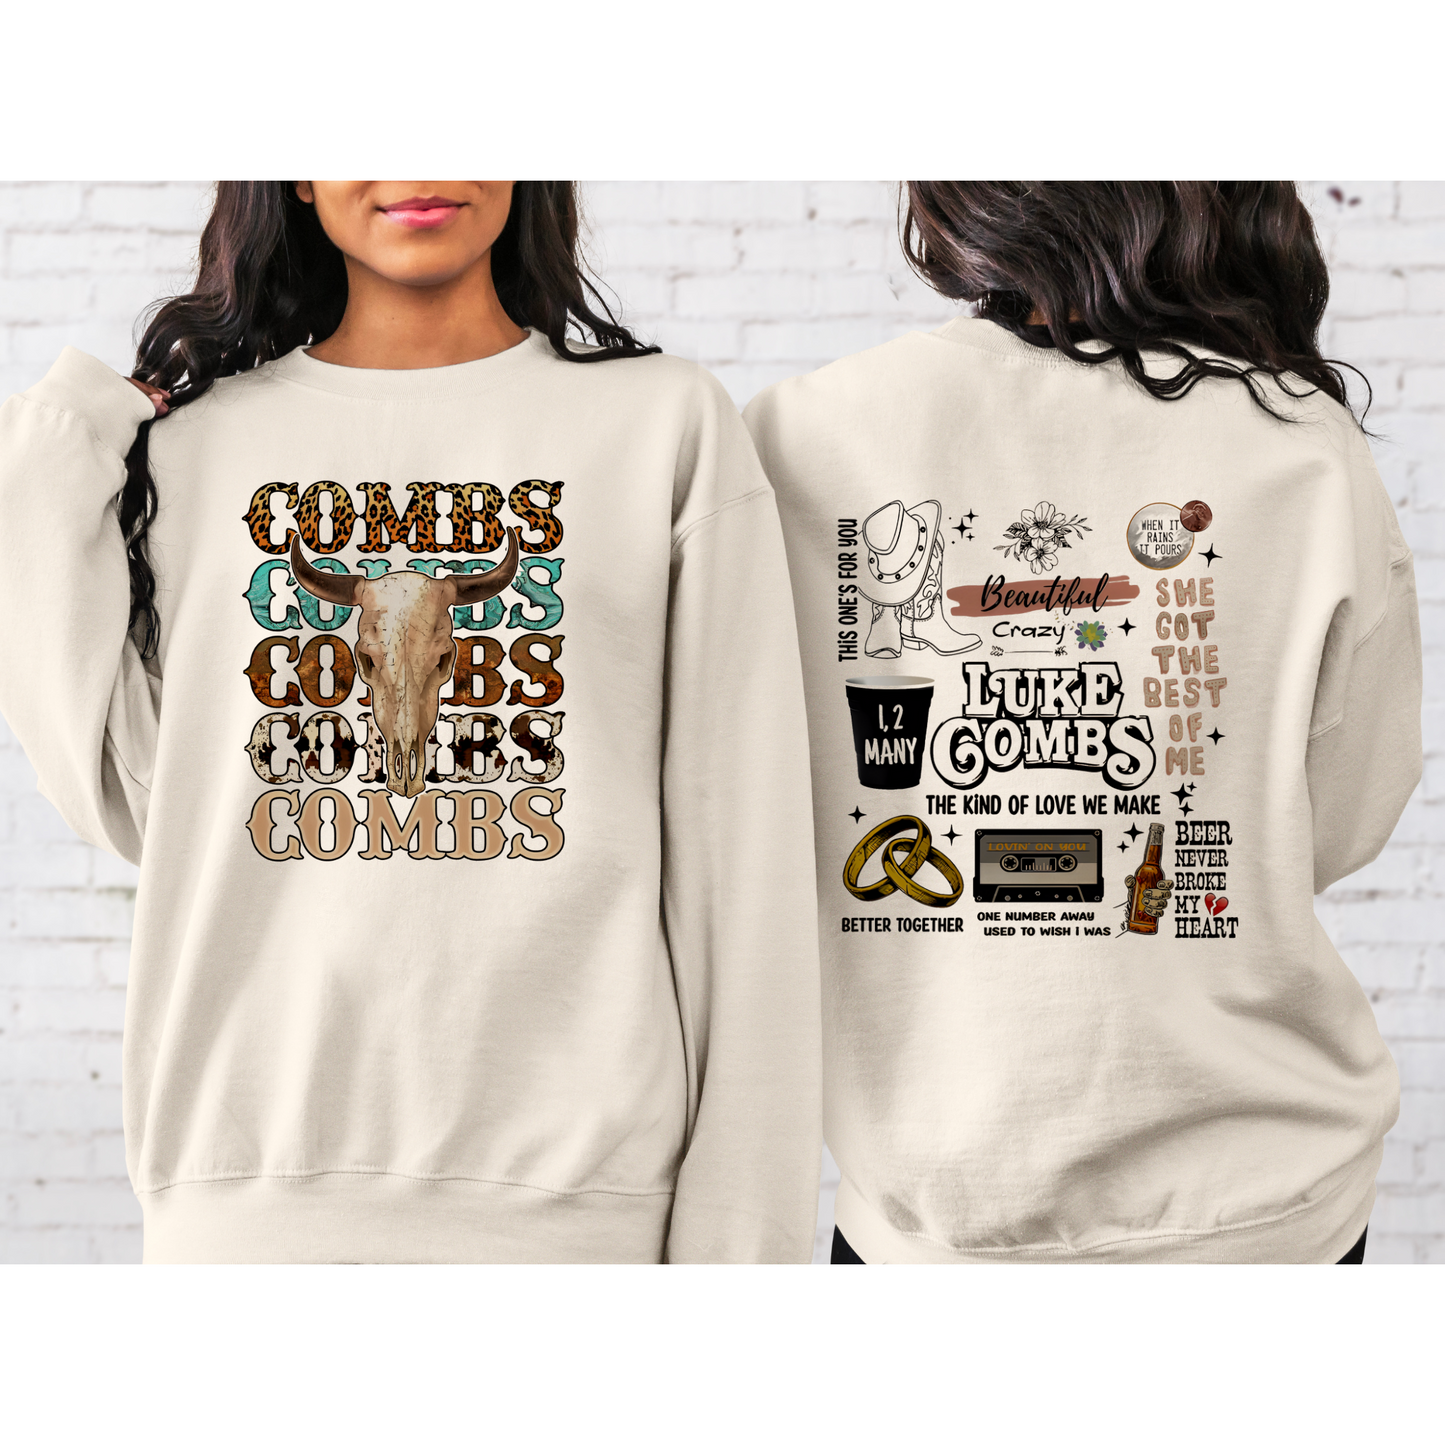 Luke Combs Full Front and Back Graphic Sweatshirt Sand